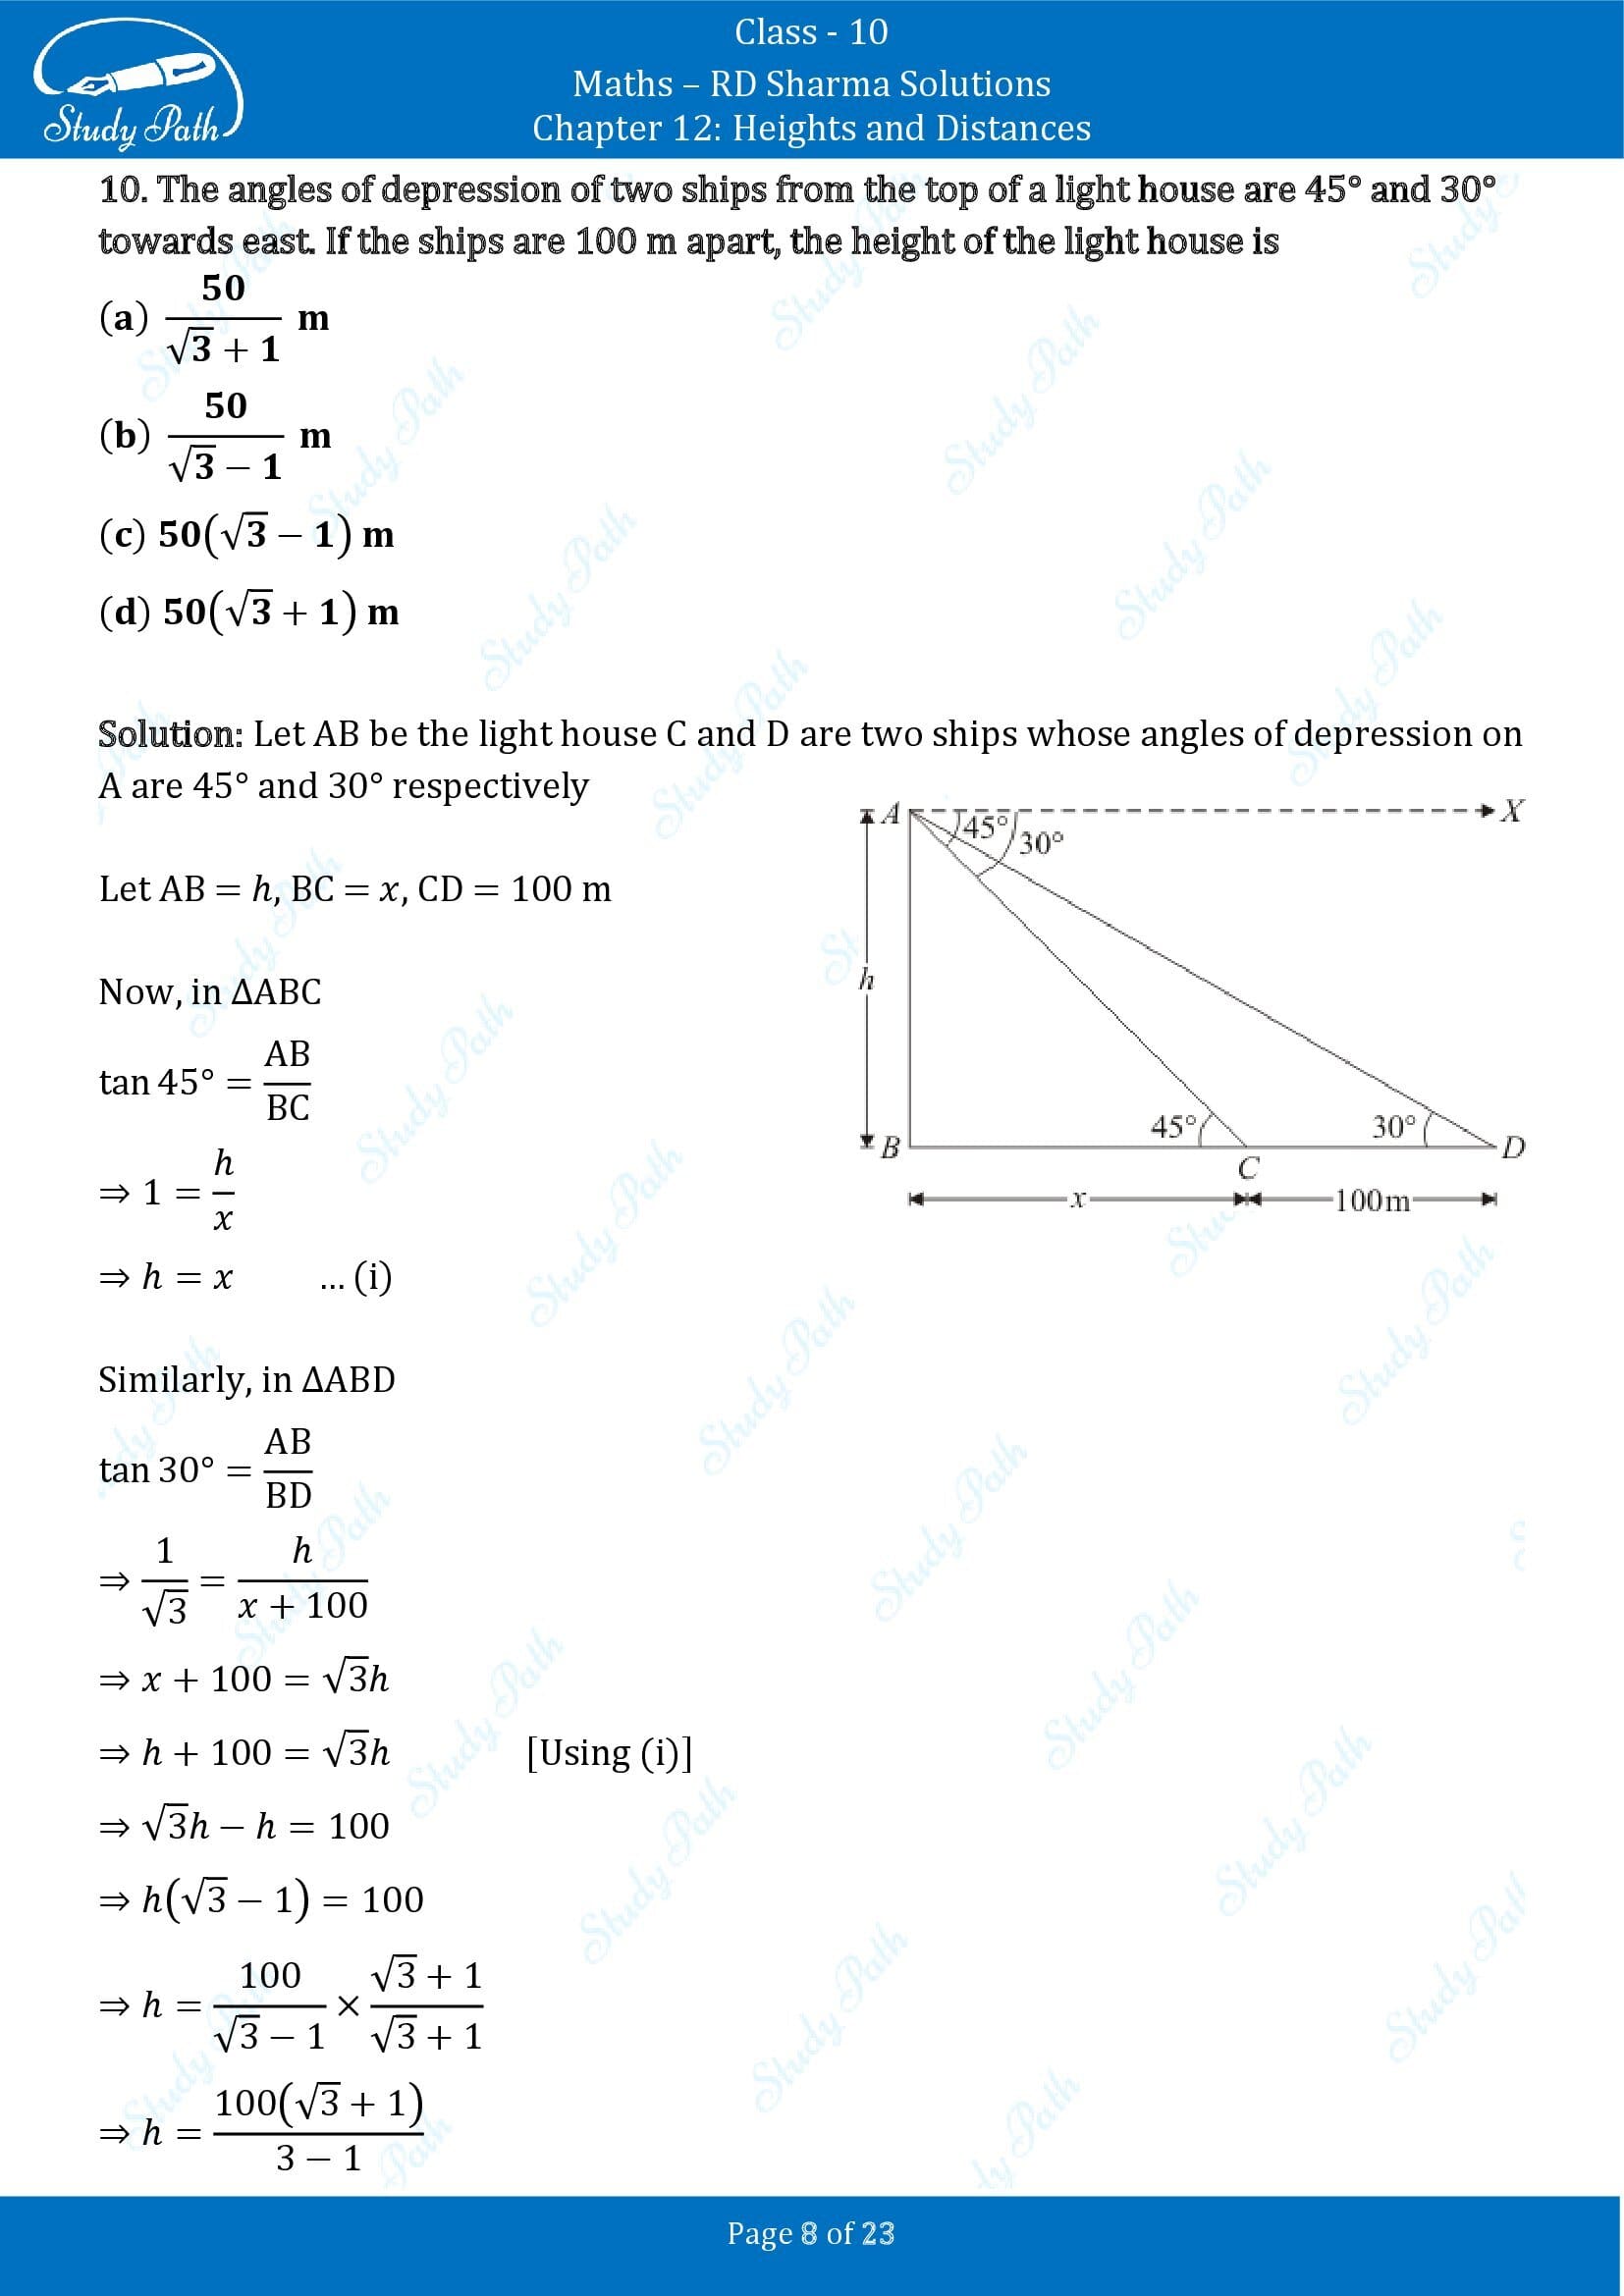 RD Sharma Solutions Class 10 Chapter 12 Heights and Distances Multiple Choice Question MCQs 00008